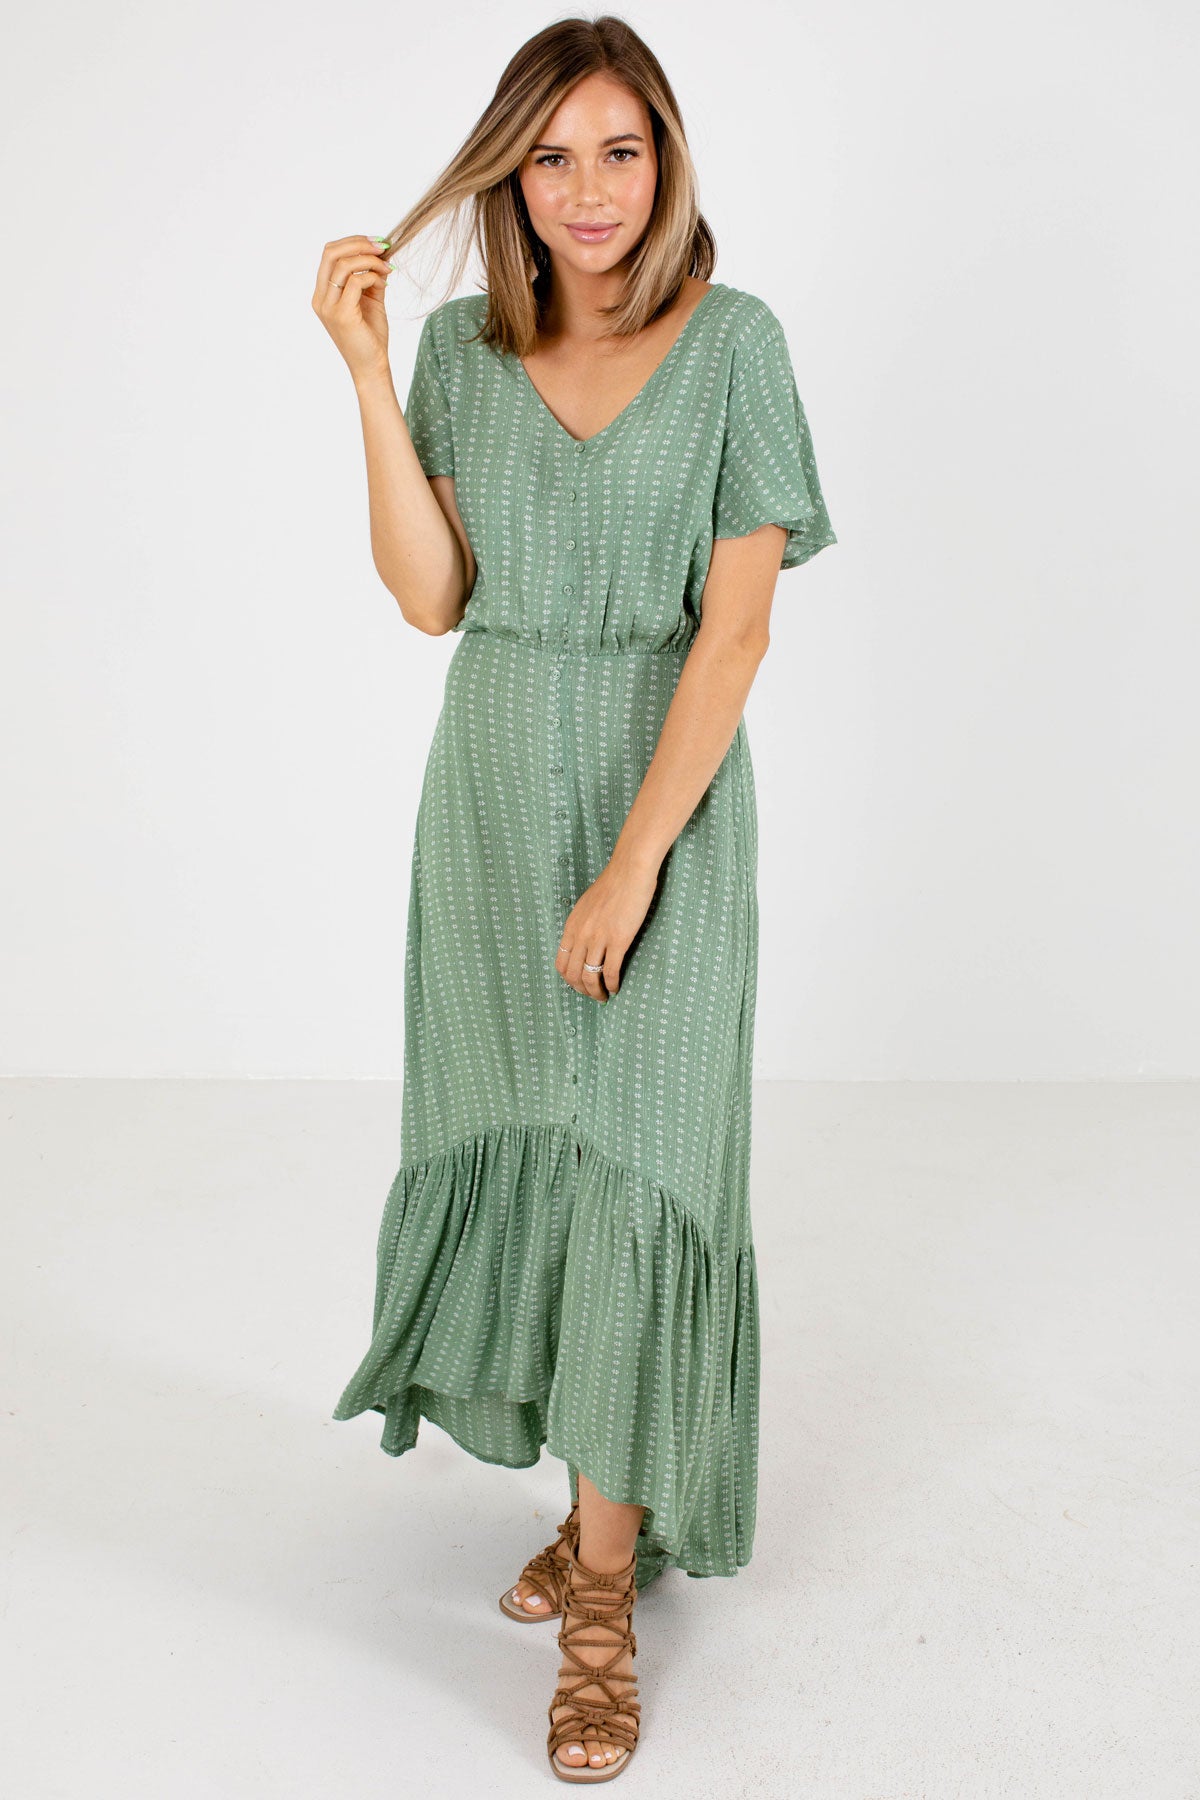 Green and White Patterned Boutique Maxi Dresses for Women